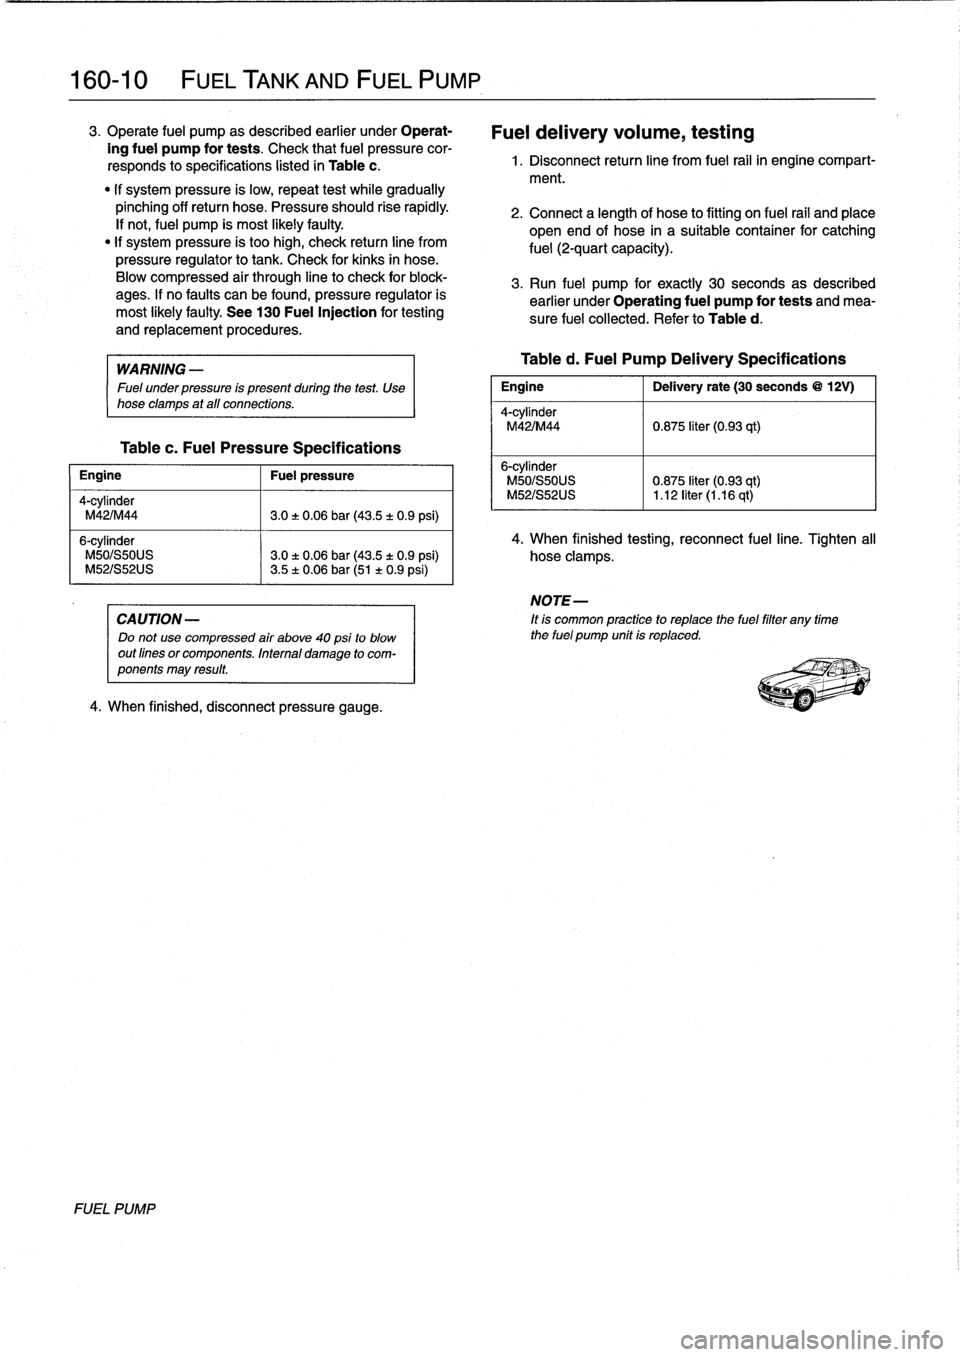 BMW 318i 1997 E36 Workshop Manual 
160-
1
0

	

FUEL
TANK
AND
FUEL
PUMP

3
.
Operate
fuel
pump
as
described
earlier
under
Operat-

ing
fuel
pump
for
tests
.
Check
that
fuel
pressure
cor-

responds
to
specifications
listed
in
Table
c
.